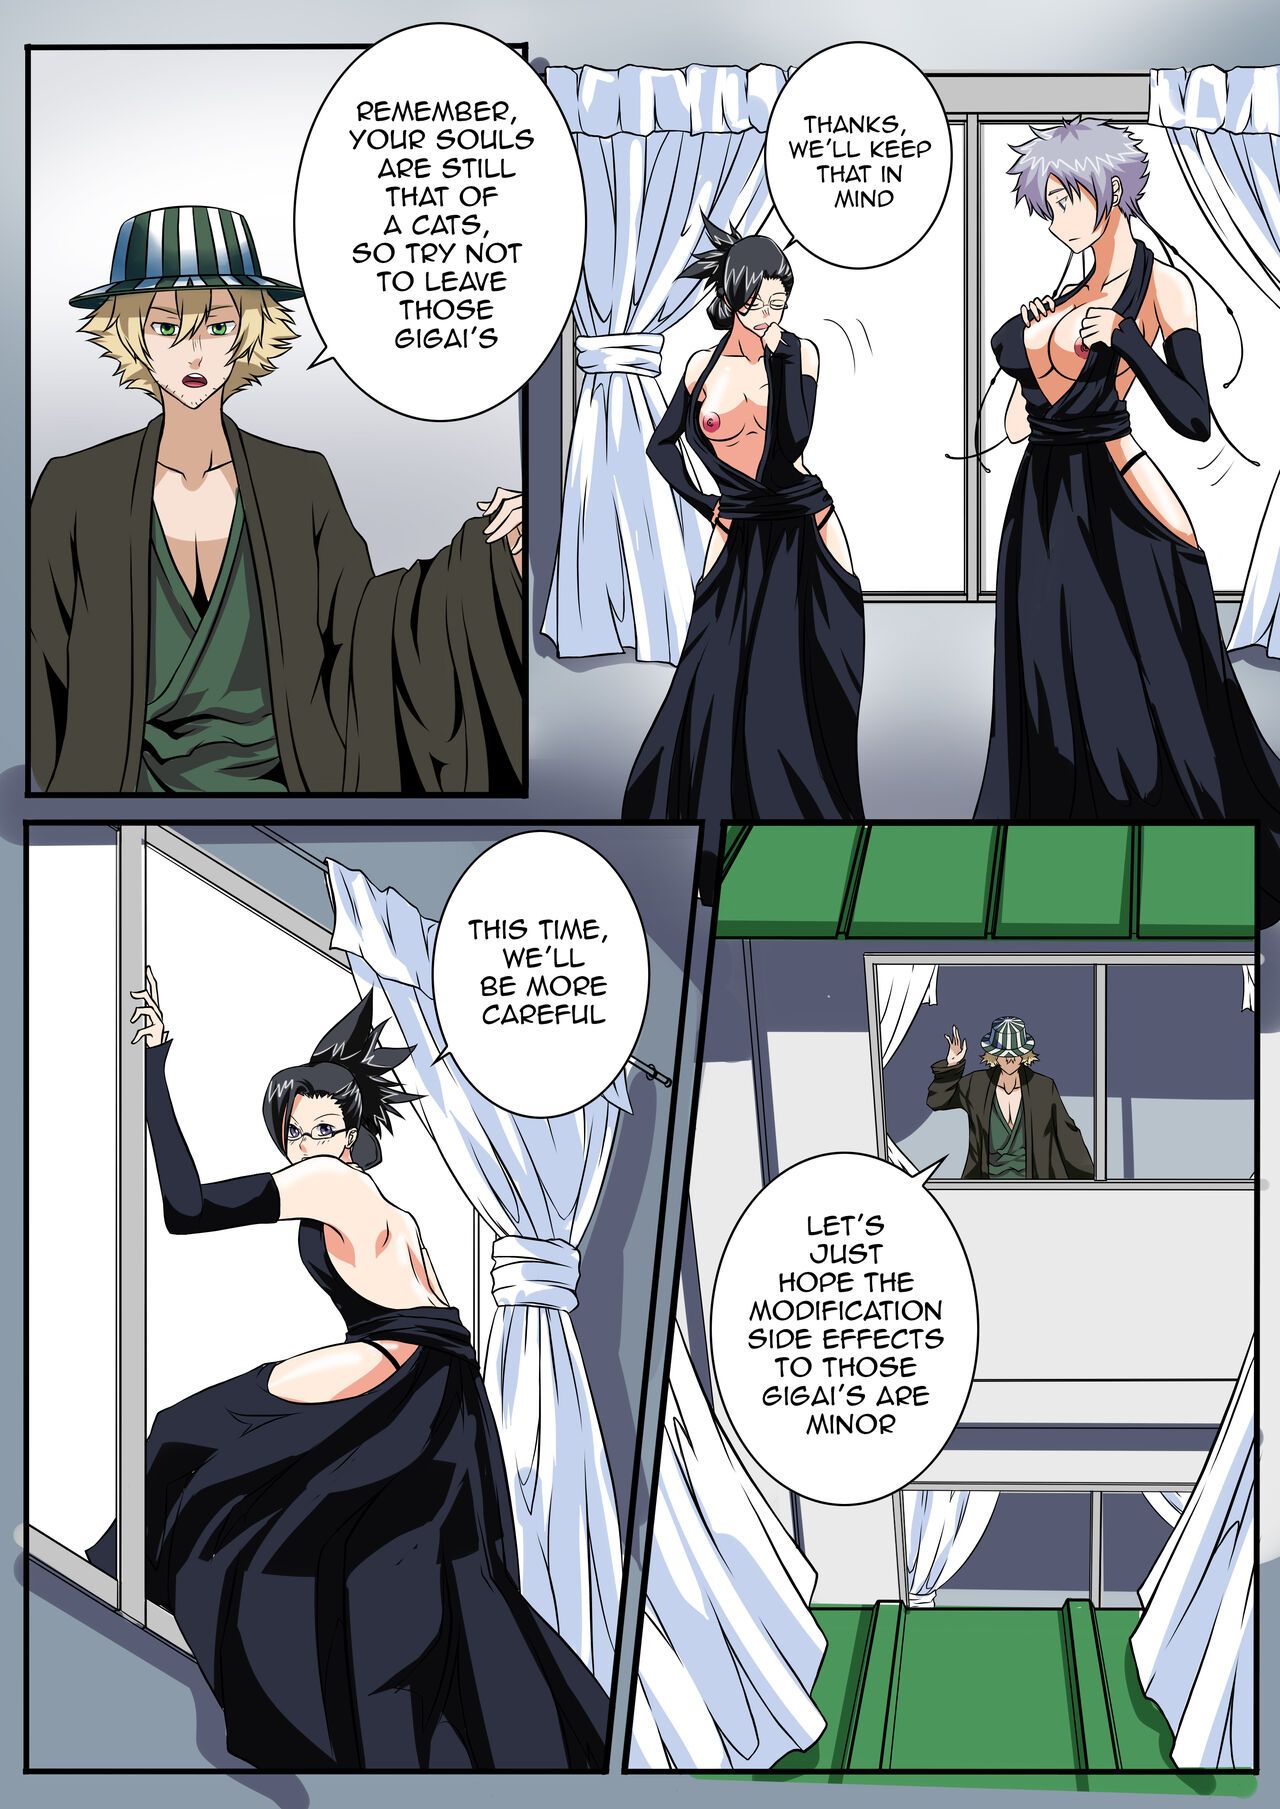 Bleach: A What If Story Part 5 Porn Comic english 37